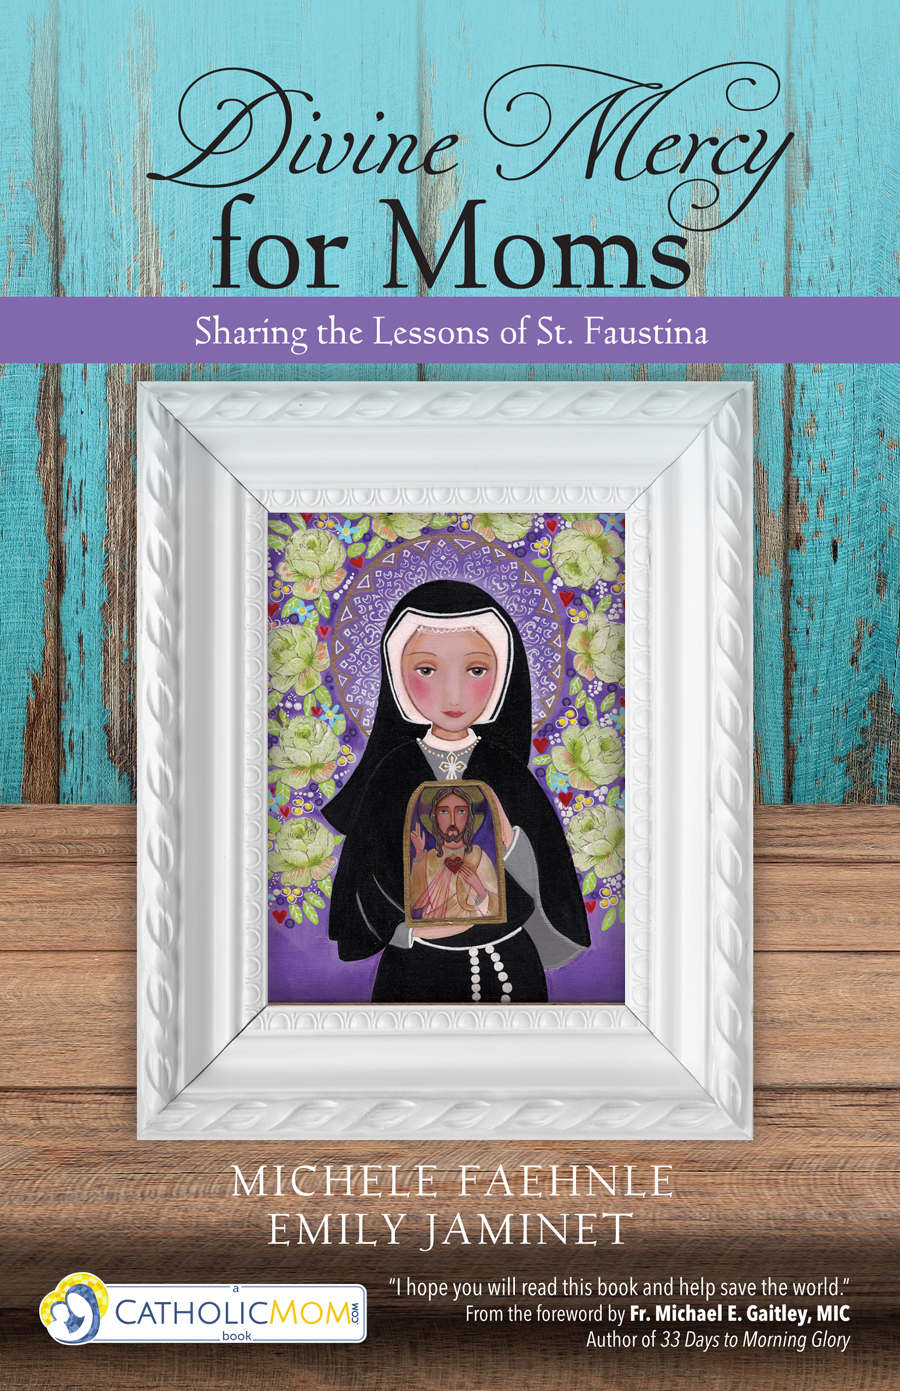 Divine mercy for moms ave maria press